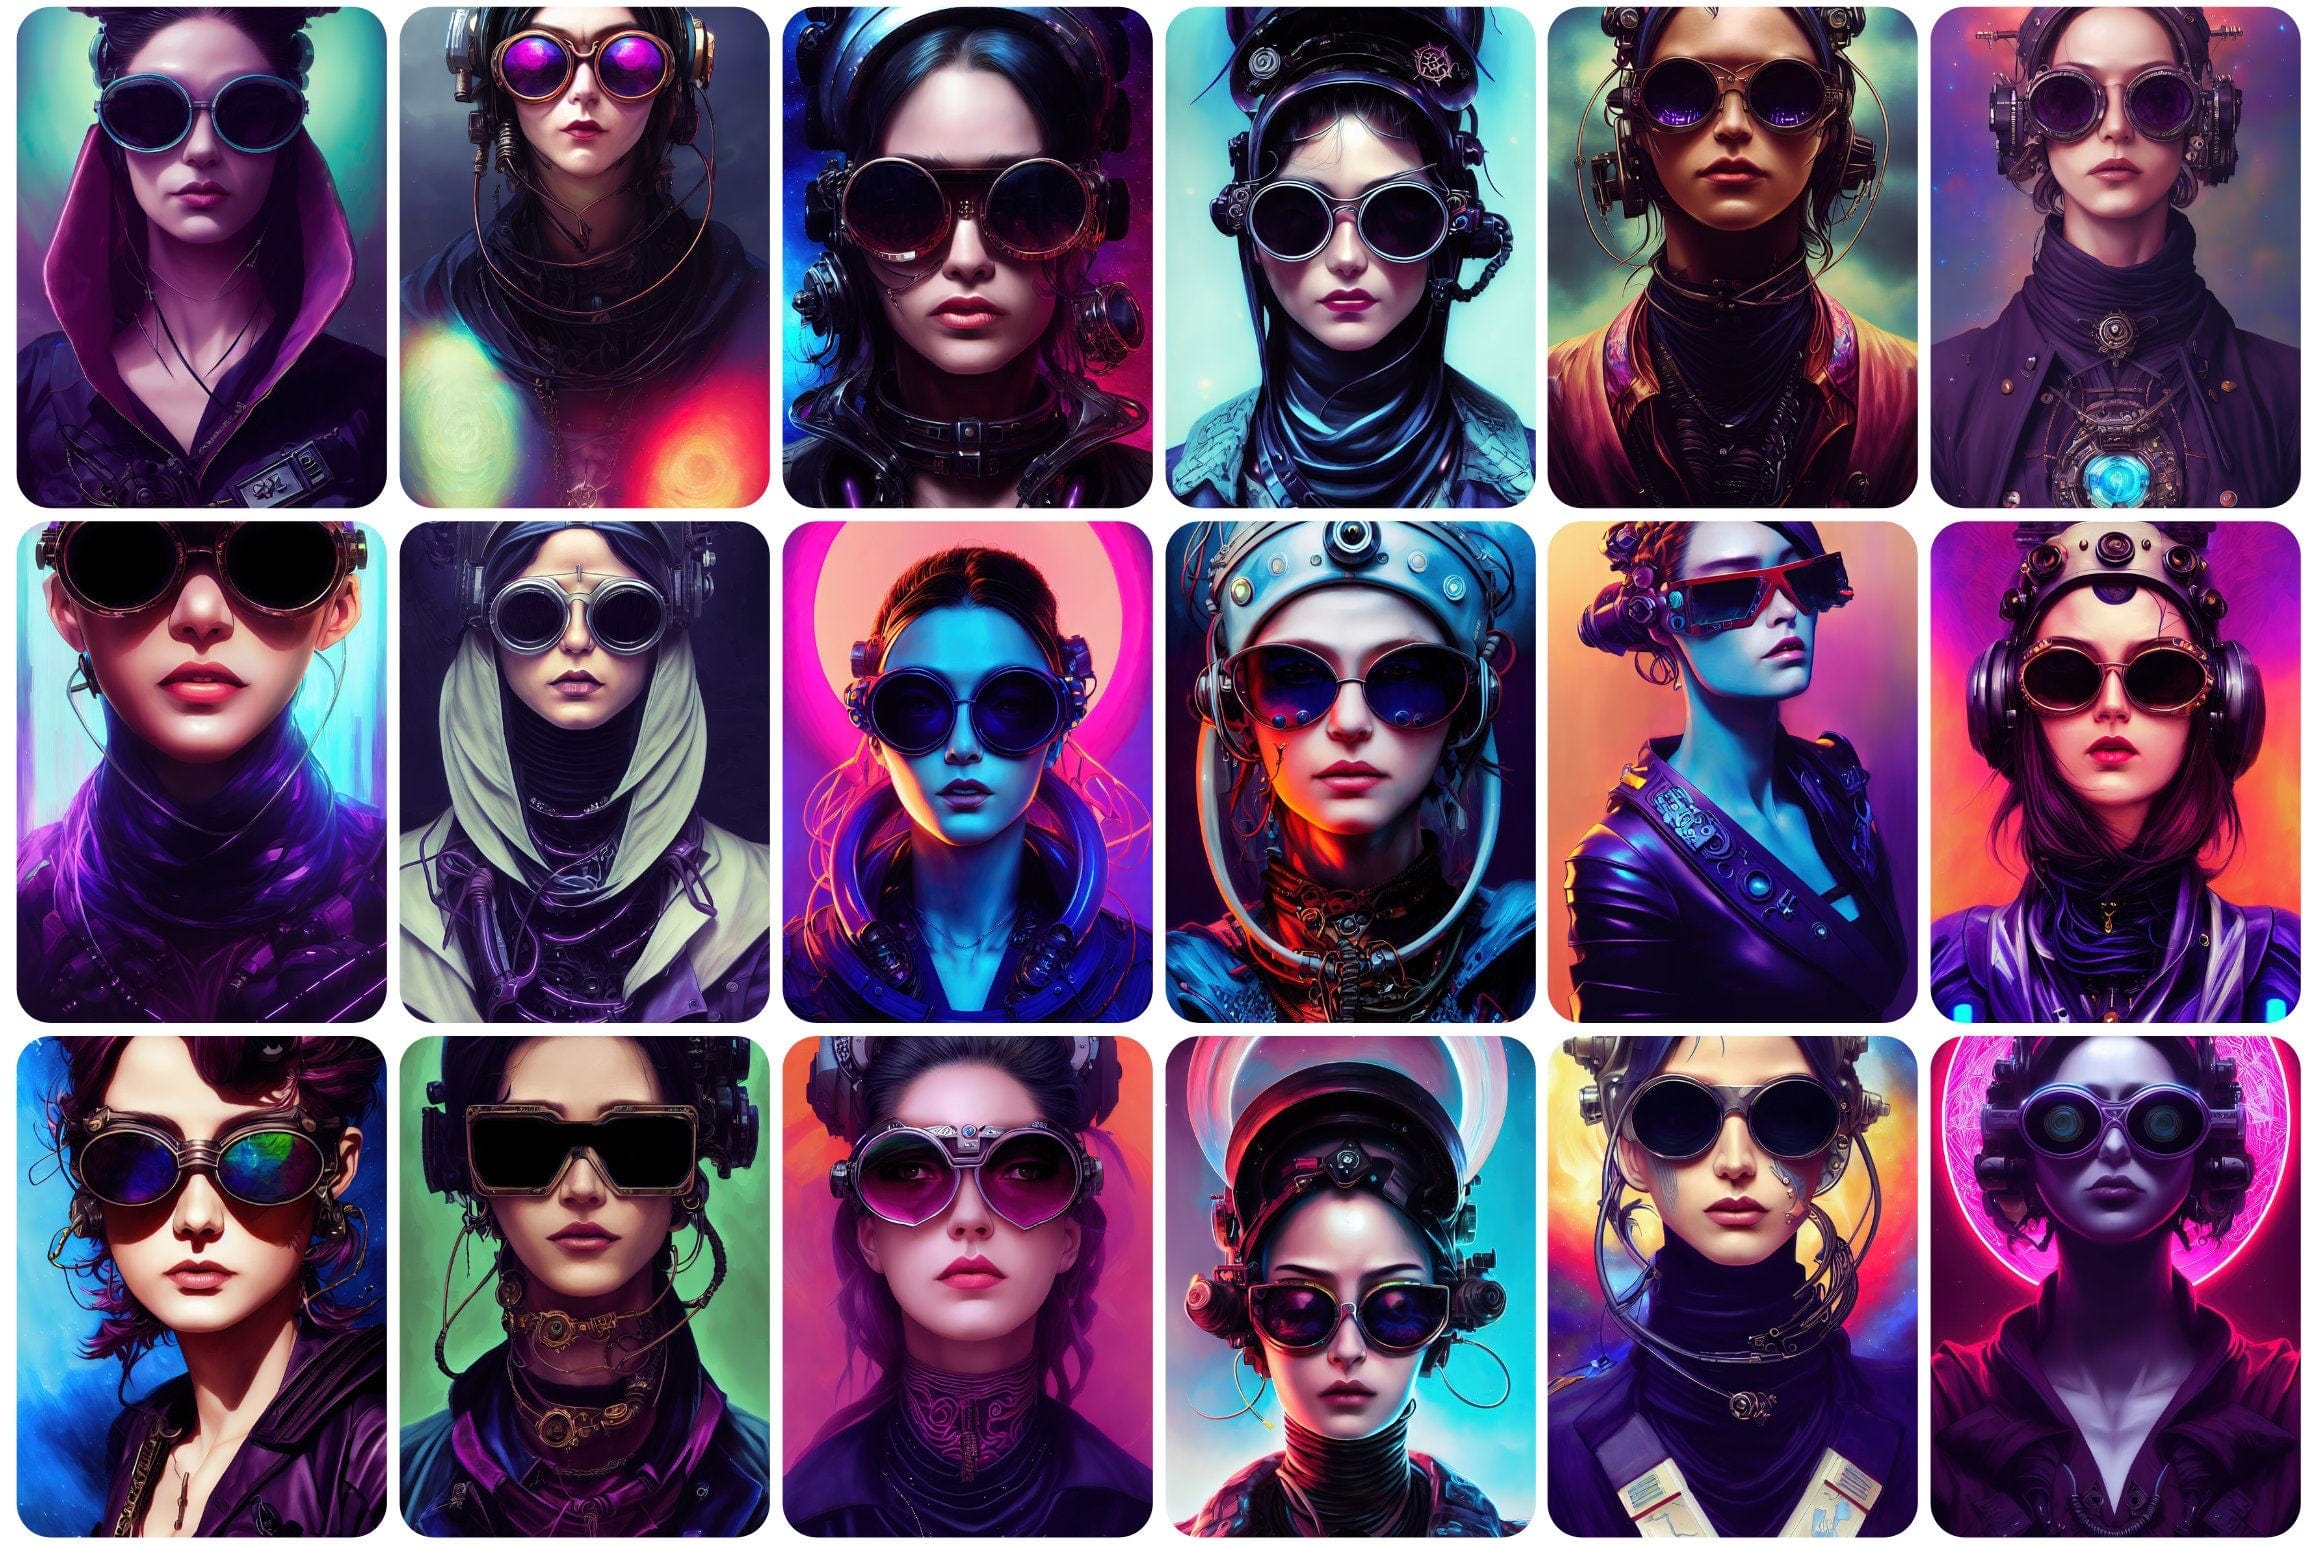 250 Printable Futuristic Cyber Woman Images - Perfect for Graphic Design, Sci-Fi Art, and Digital Projects - Cyberpunk-Inspired Women Digital Download Sumobundle